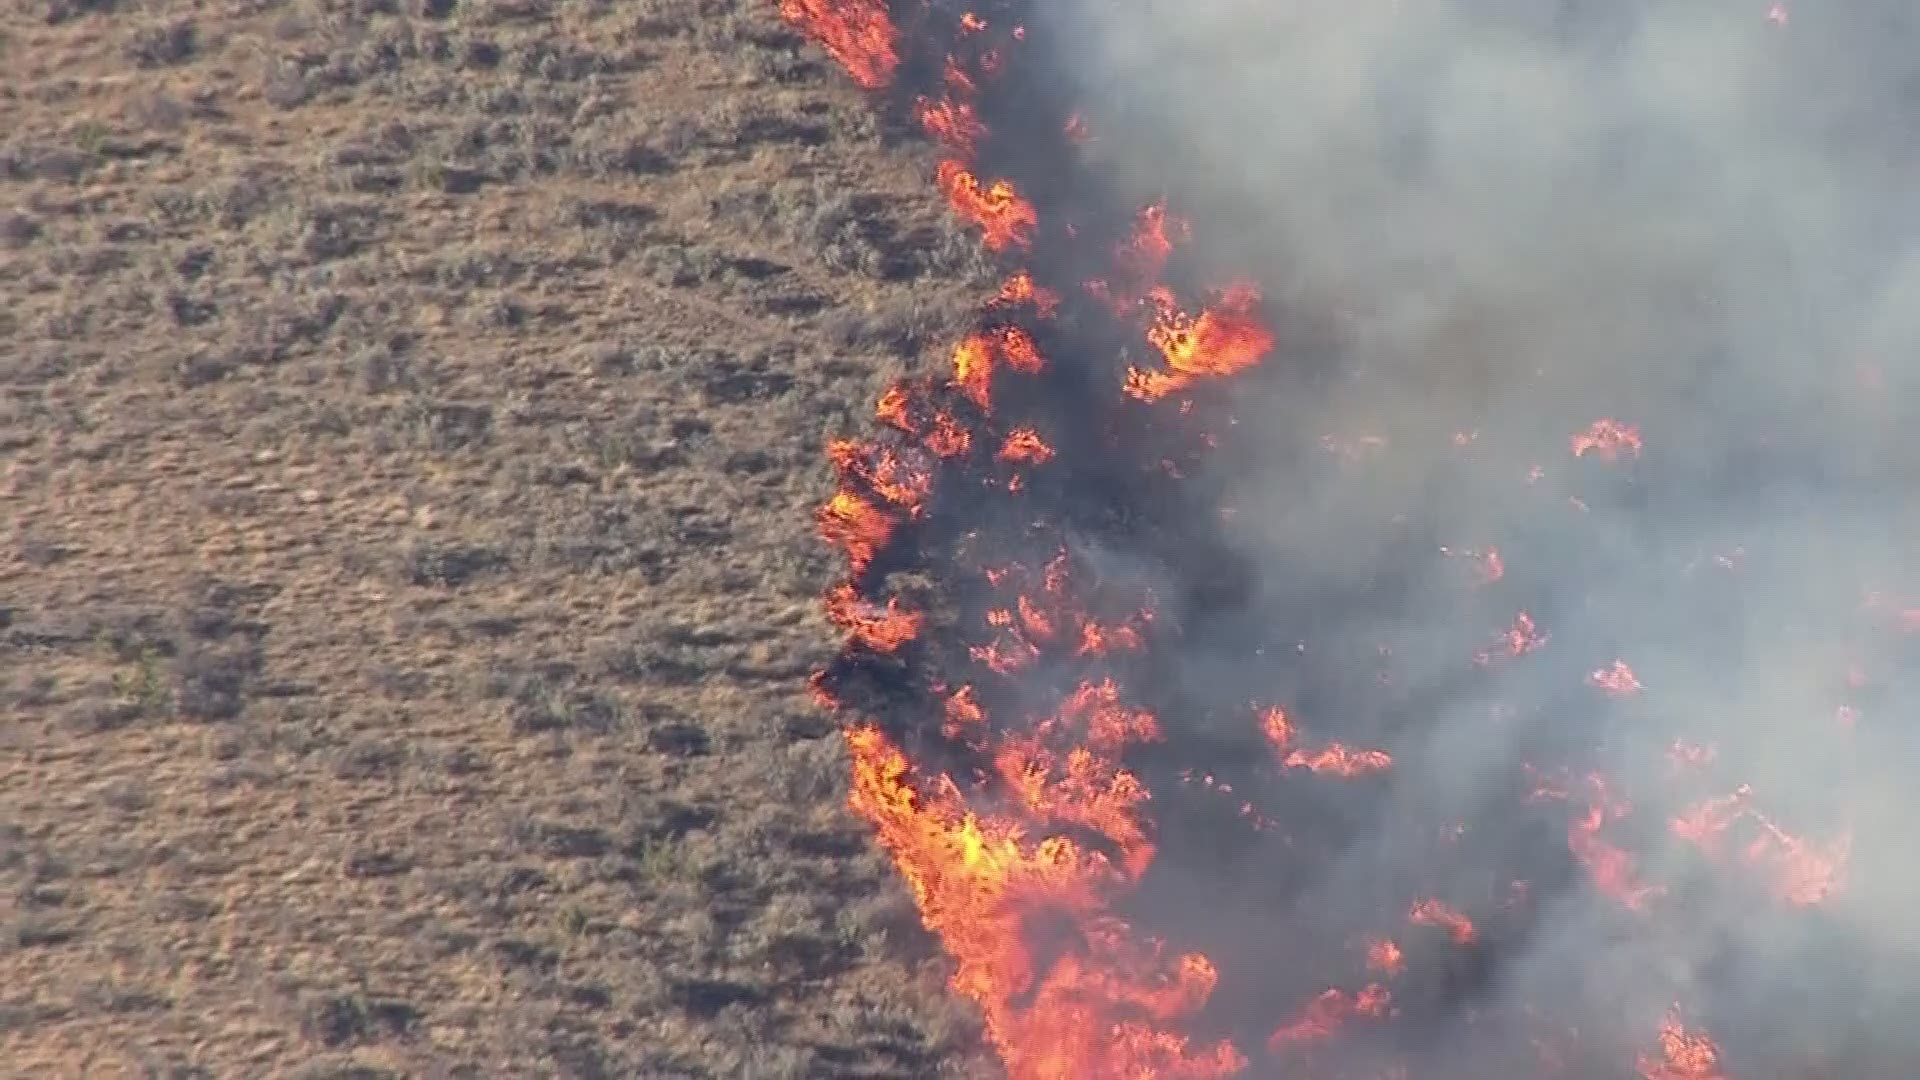 Sky 8 was over the wildfire burning near Warm Springs.